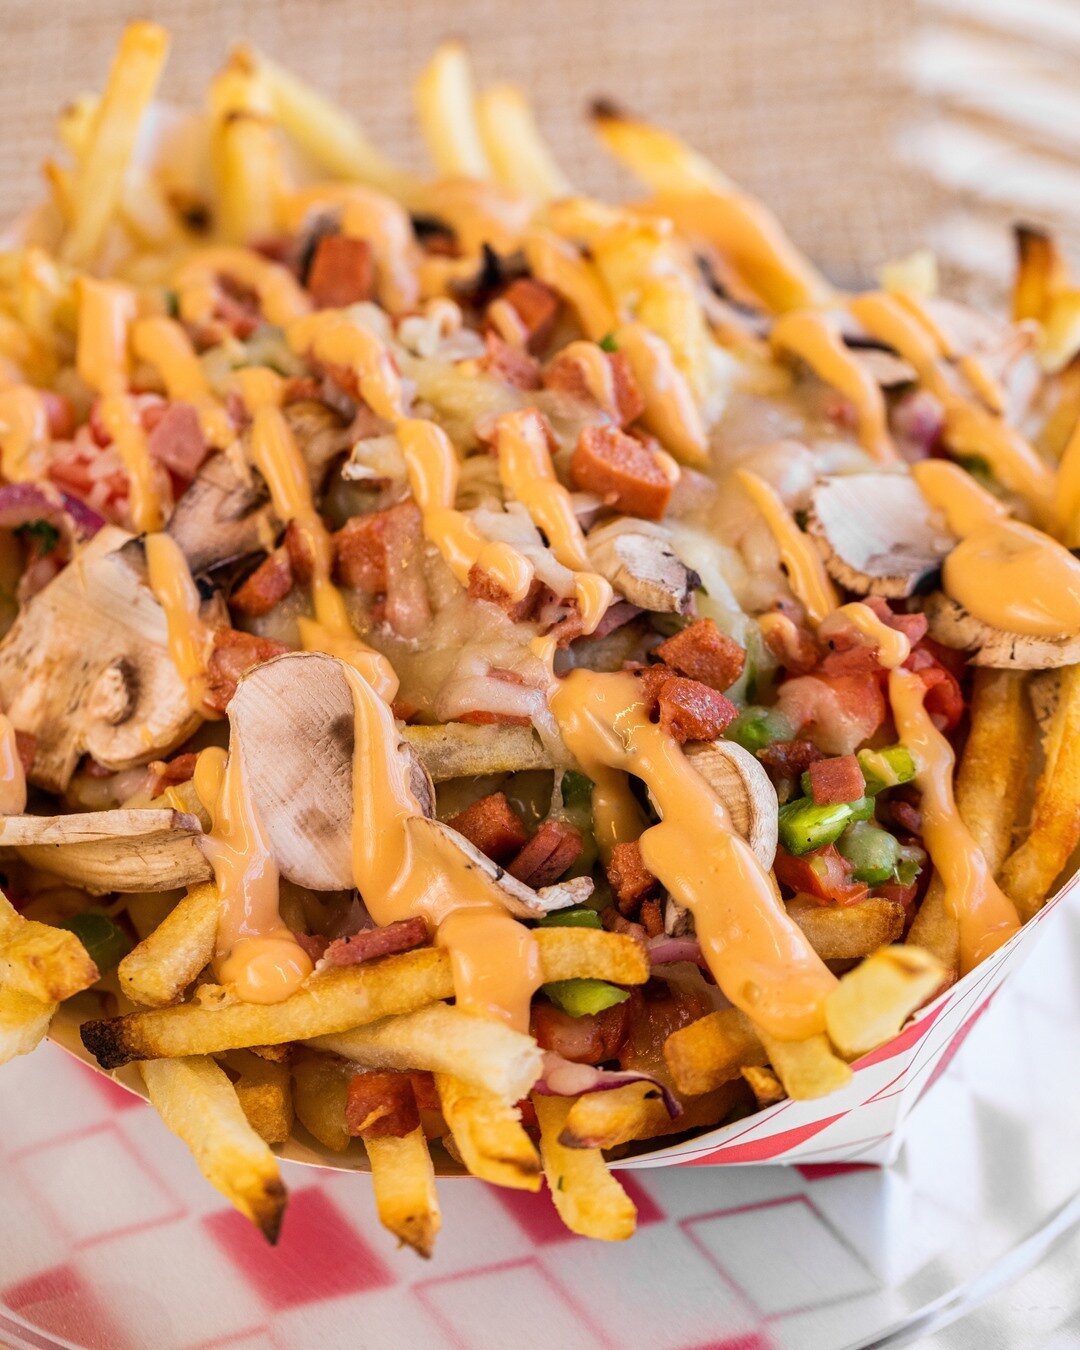 🍟🍟 CRAZY FRIES that are CRAZY GOOD! Patio dining and limited indoor dining NOW AVAILABLE at Caf&eacute; Glac&eacute;! #CafeGlace